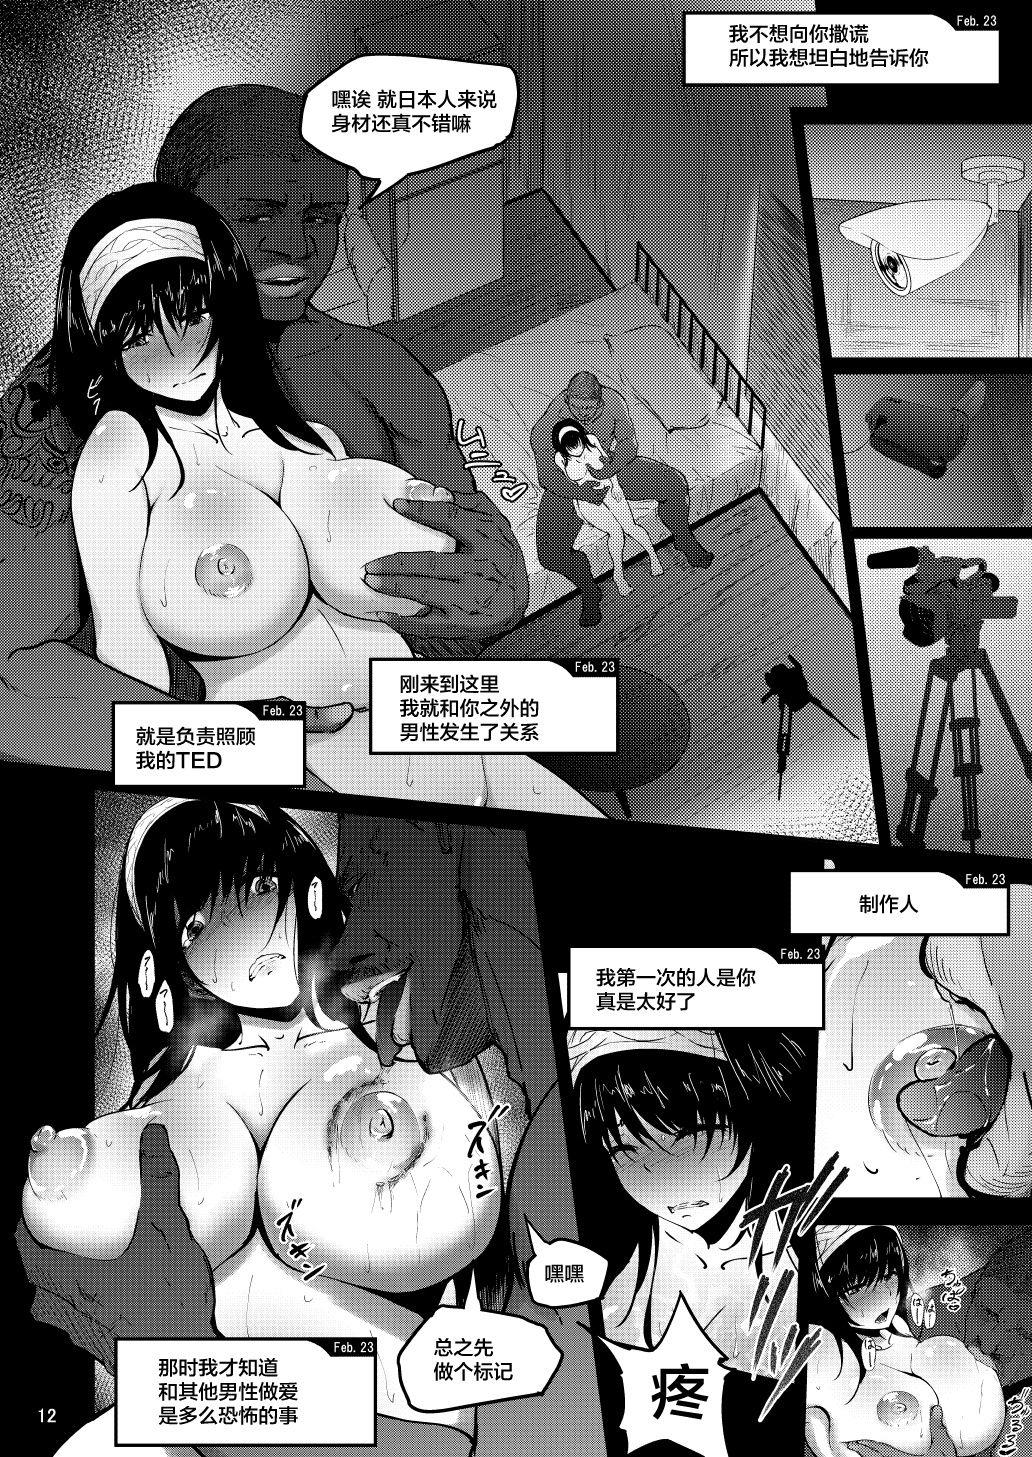 Online FROM FUMIKA - The idolmaster Bro - Page 11